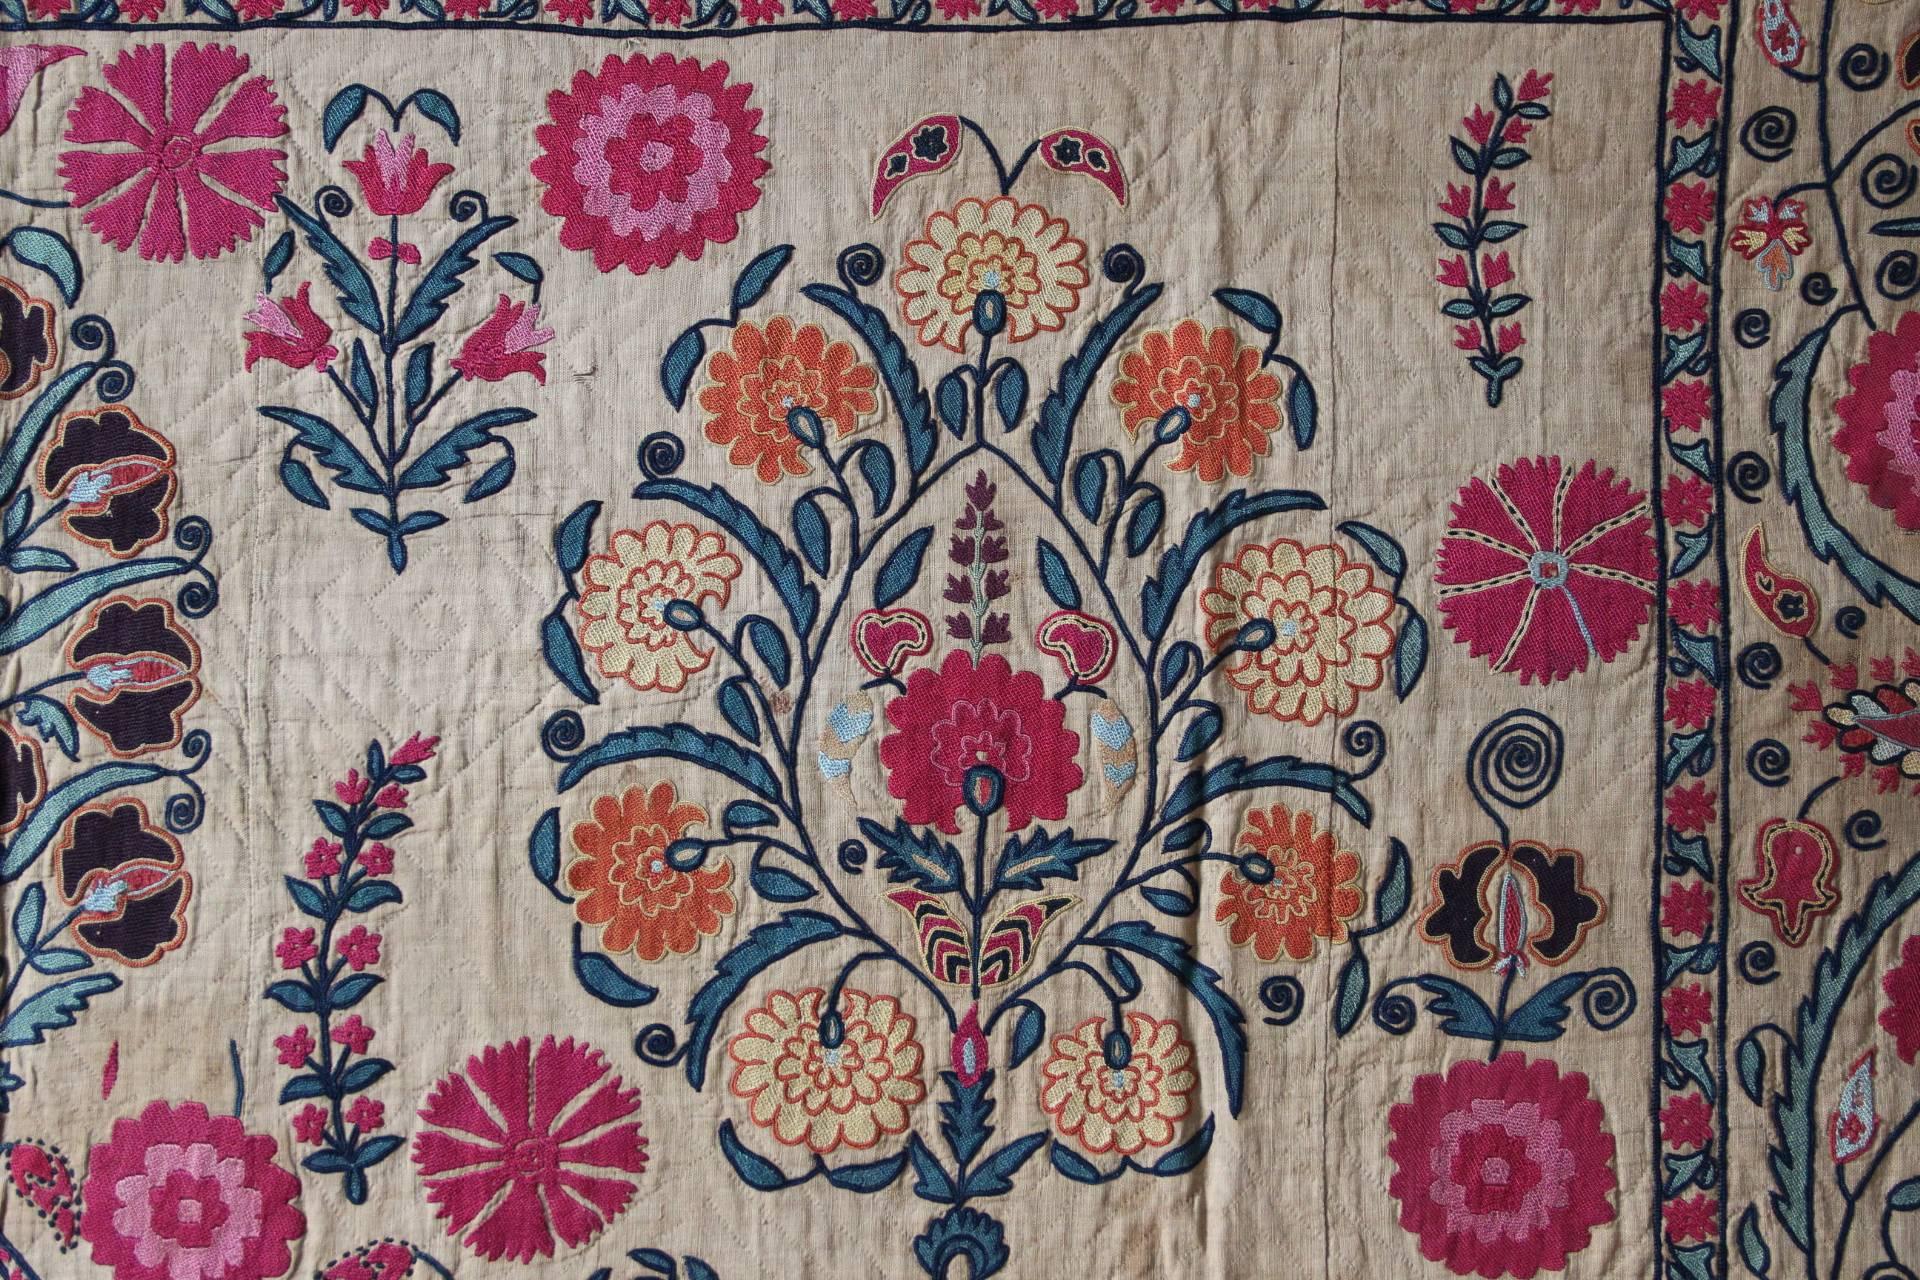 A stunning silk on cotton hand stitched embroidery from the district of Ura Tube, Uzbekistan. Made as a dowry to demonstrate the bride to be's skill with the needle and a not inconsiderable store of wealth, these fabulous objects of art have become